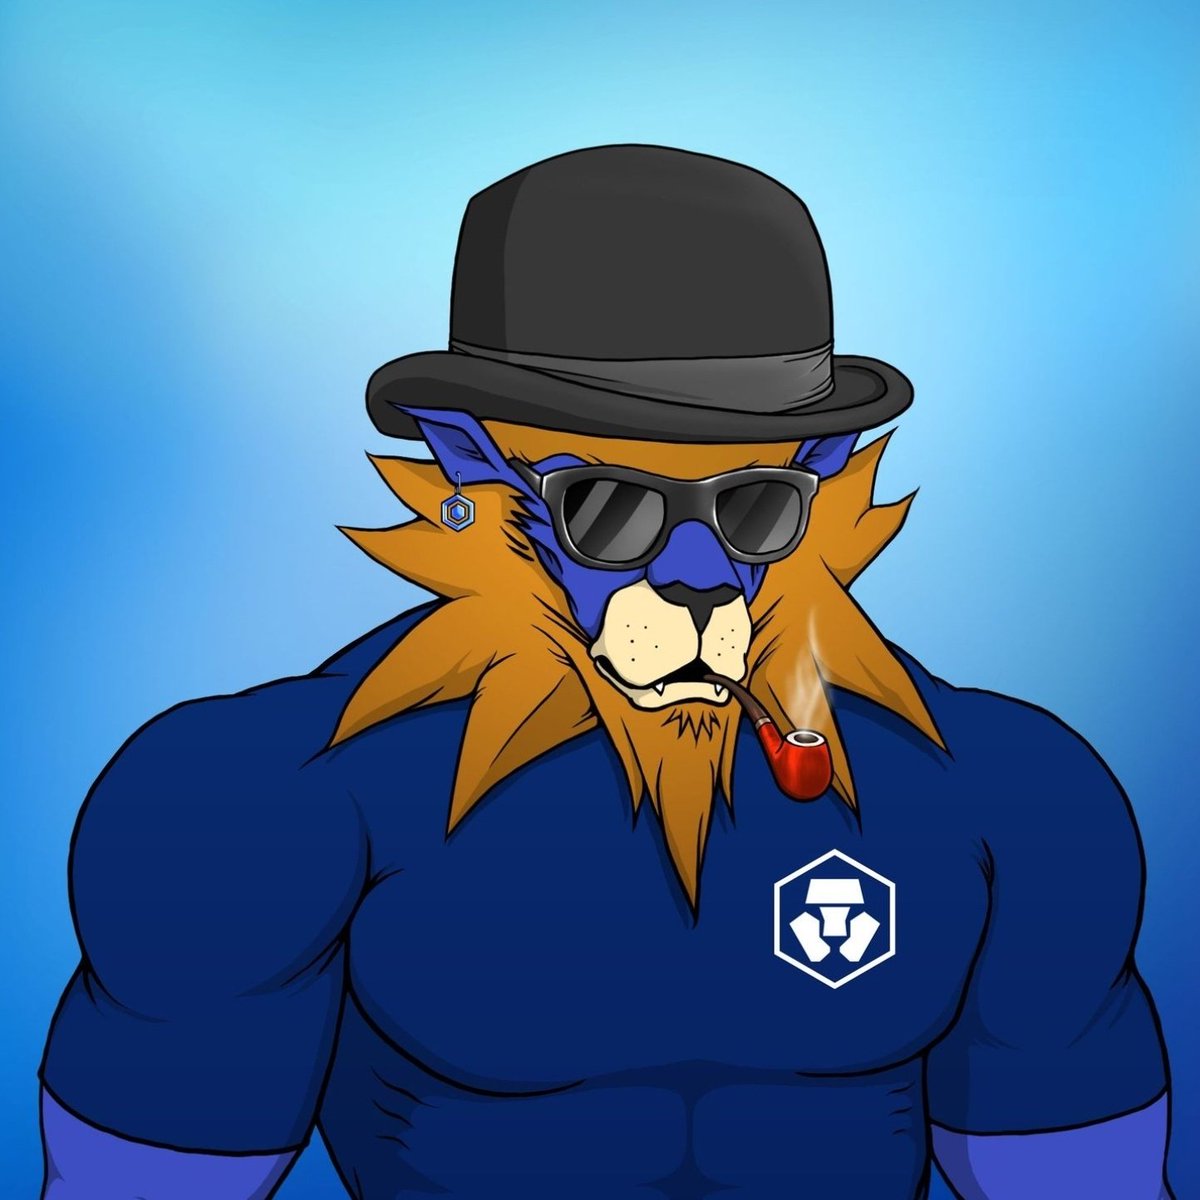 Out of 10k @LoadedLions_CDC there is only 1 that is Blu-est of Blu: Blu Skin, Blu background, Blu Cronos shirt, & Blu Cronos earring. And it now belongs to Blu Bird! Rank 34. Thanks to the legend @_CryptoDiamond for the deal of the decade! #crofam #ManeCity #MythicalMafia LFG!